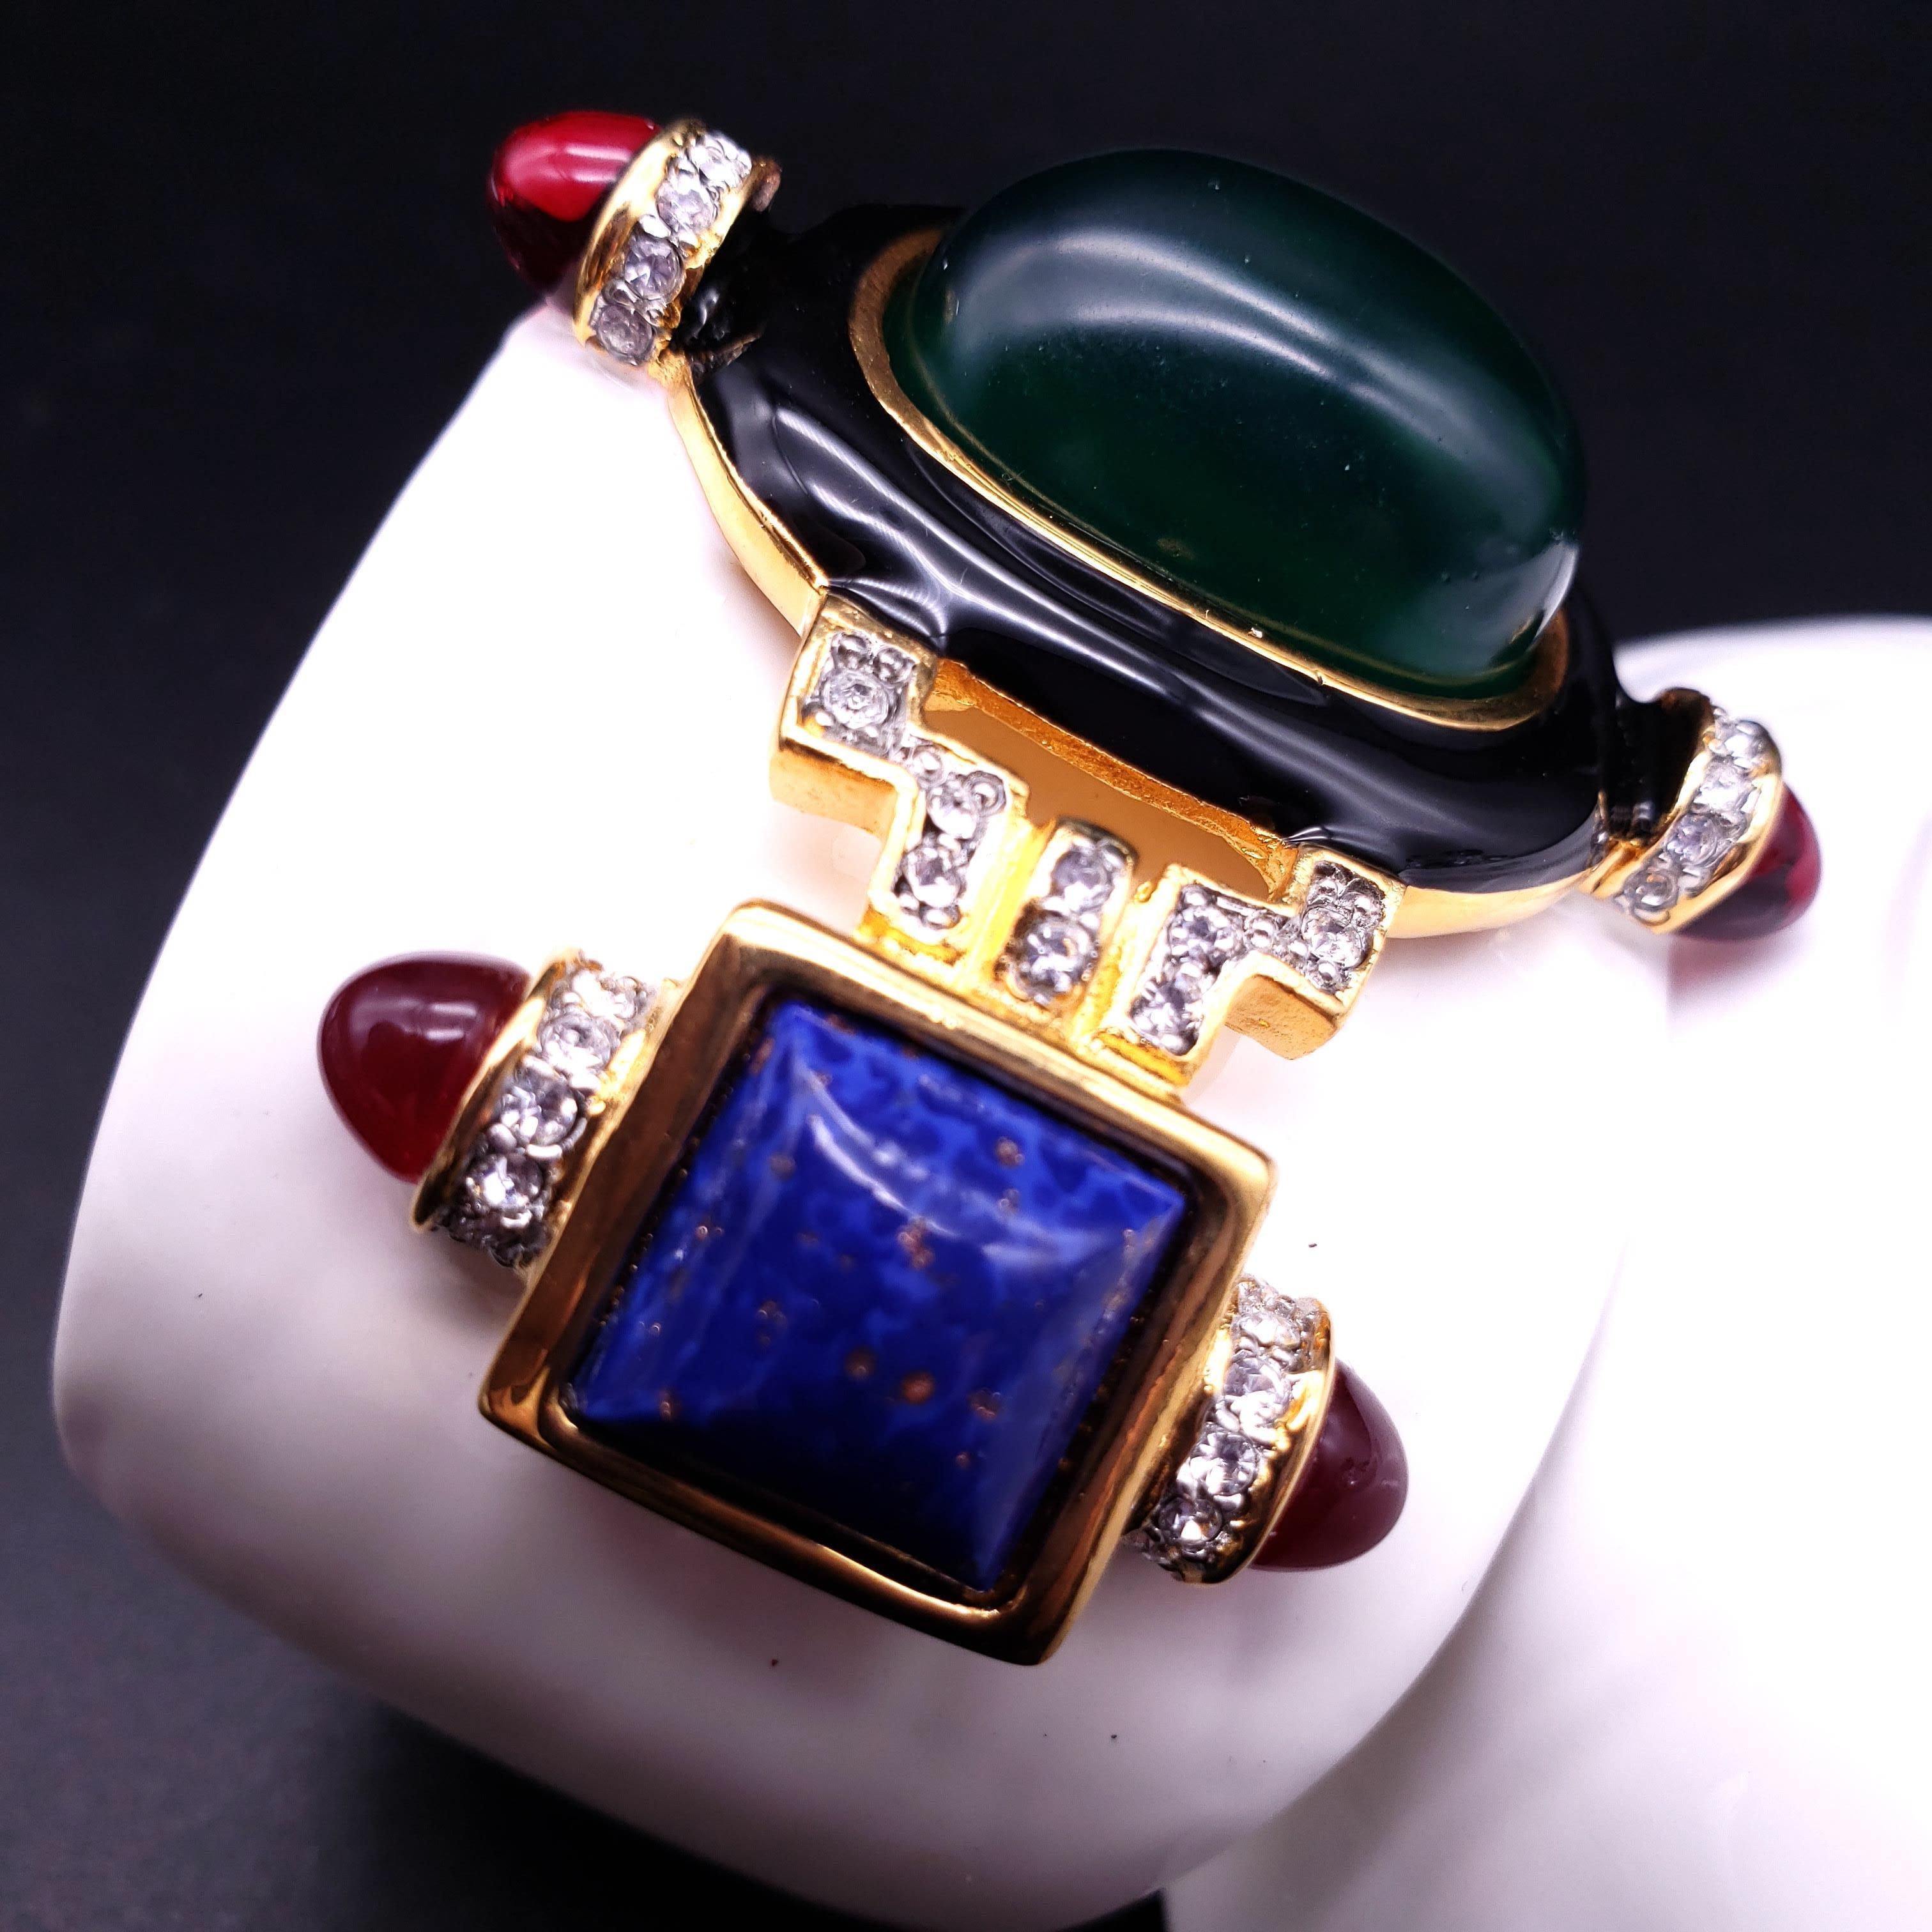 Kenneth Jay Lane cuff bracelet. White enamel and 22KT gold plated. Green resin cabochon centerpiece accented with faux emerald, lapis lazuli, and clear crystals.

...

Measurements: inner circumference 6